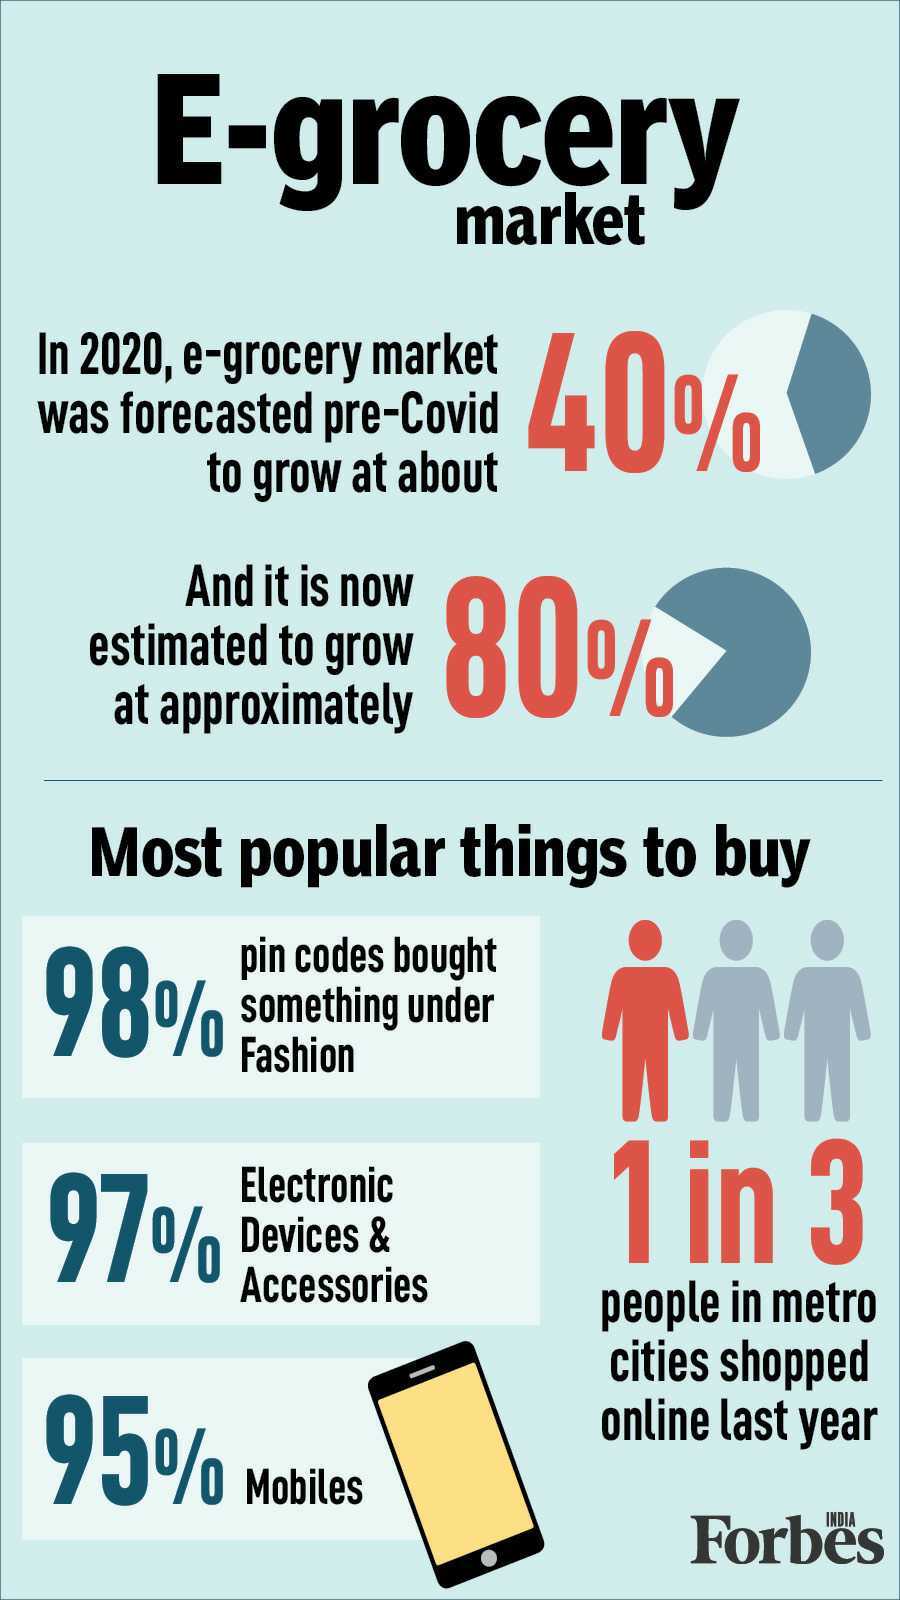 How Indians shop online: Done in 9.5 minutes, images over descriptions, voice gaining popularity